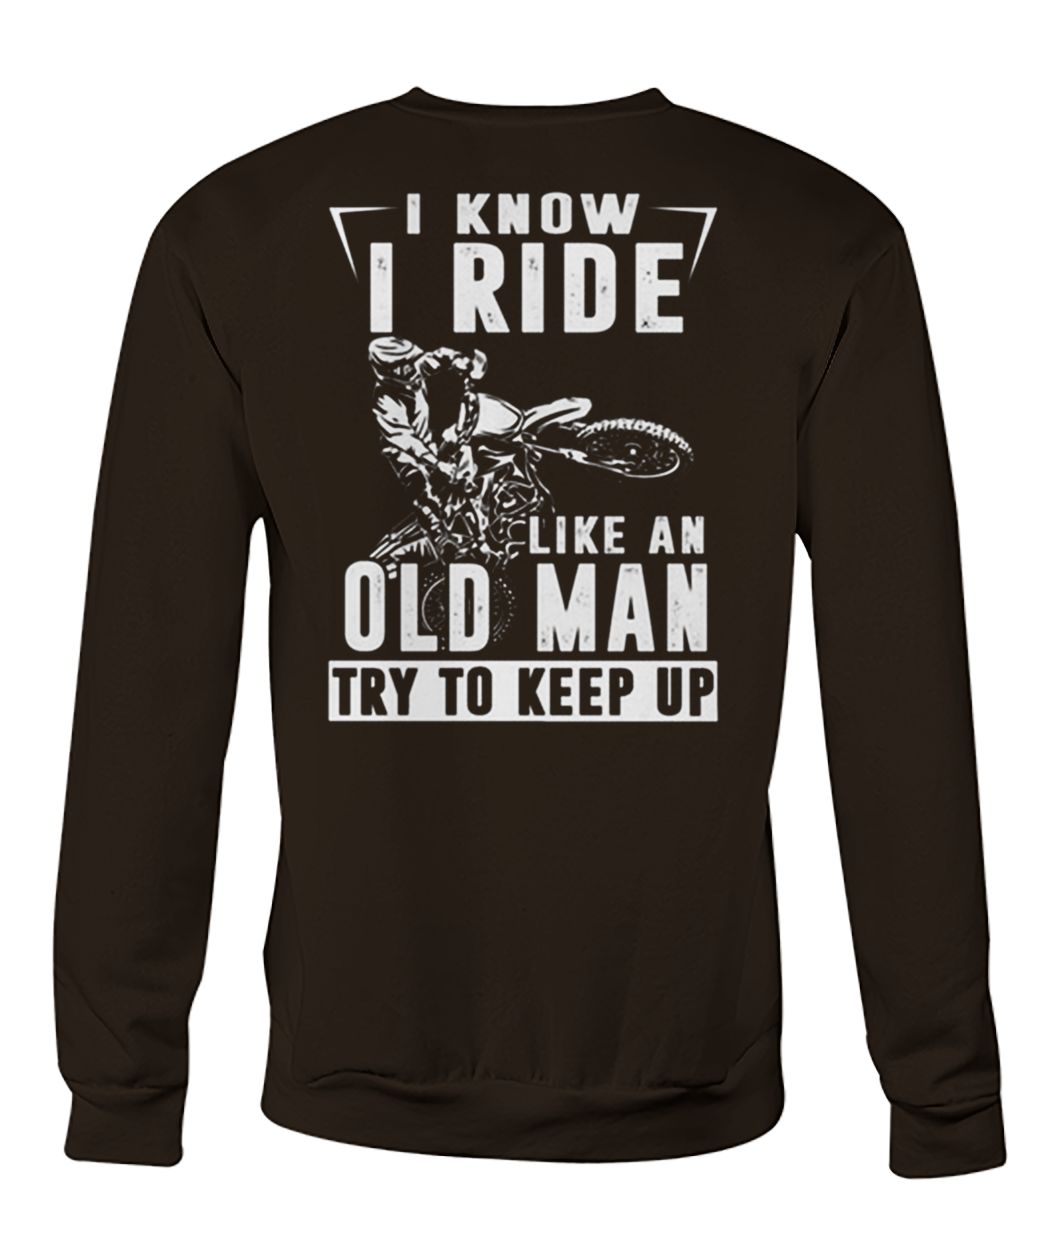 I know I ride like an old man try to keep up crew neck sweatshirt